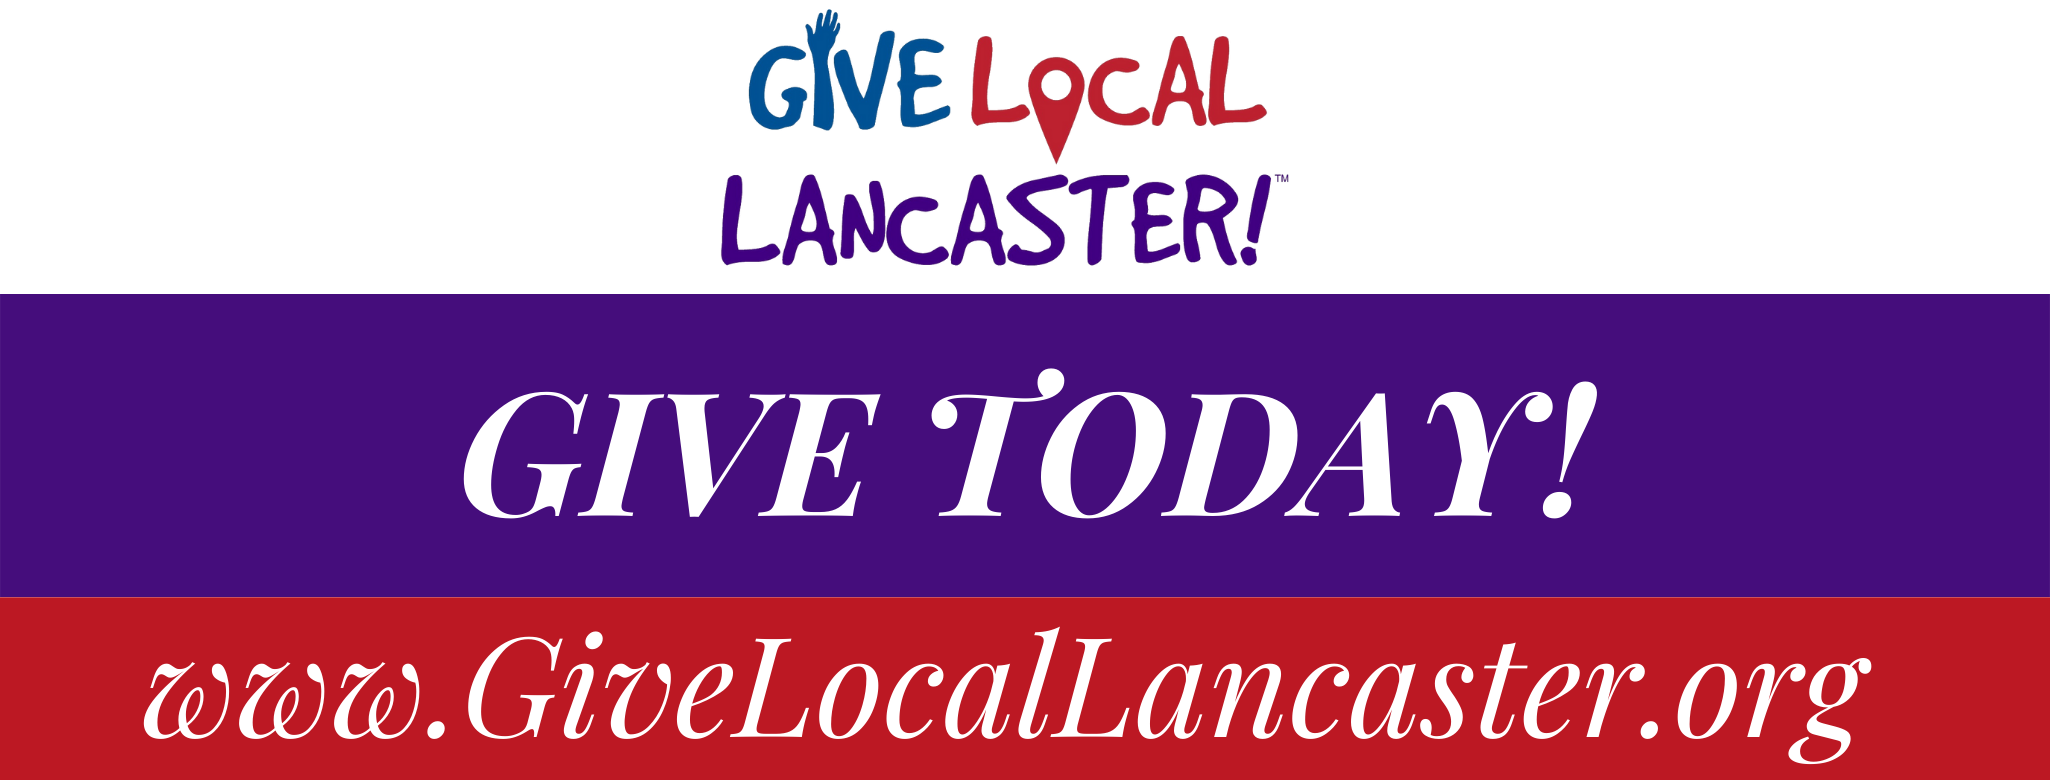 Give Local Lancaster – GIVE TODAY!